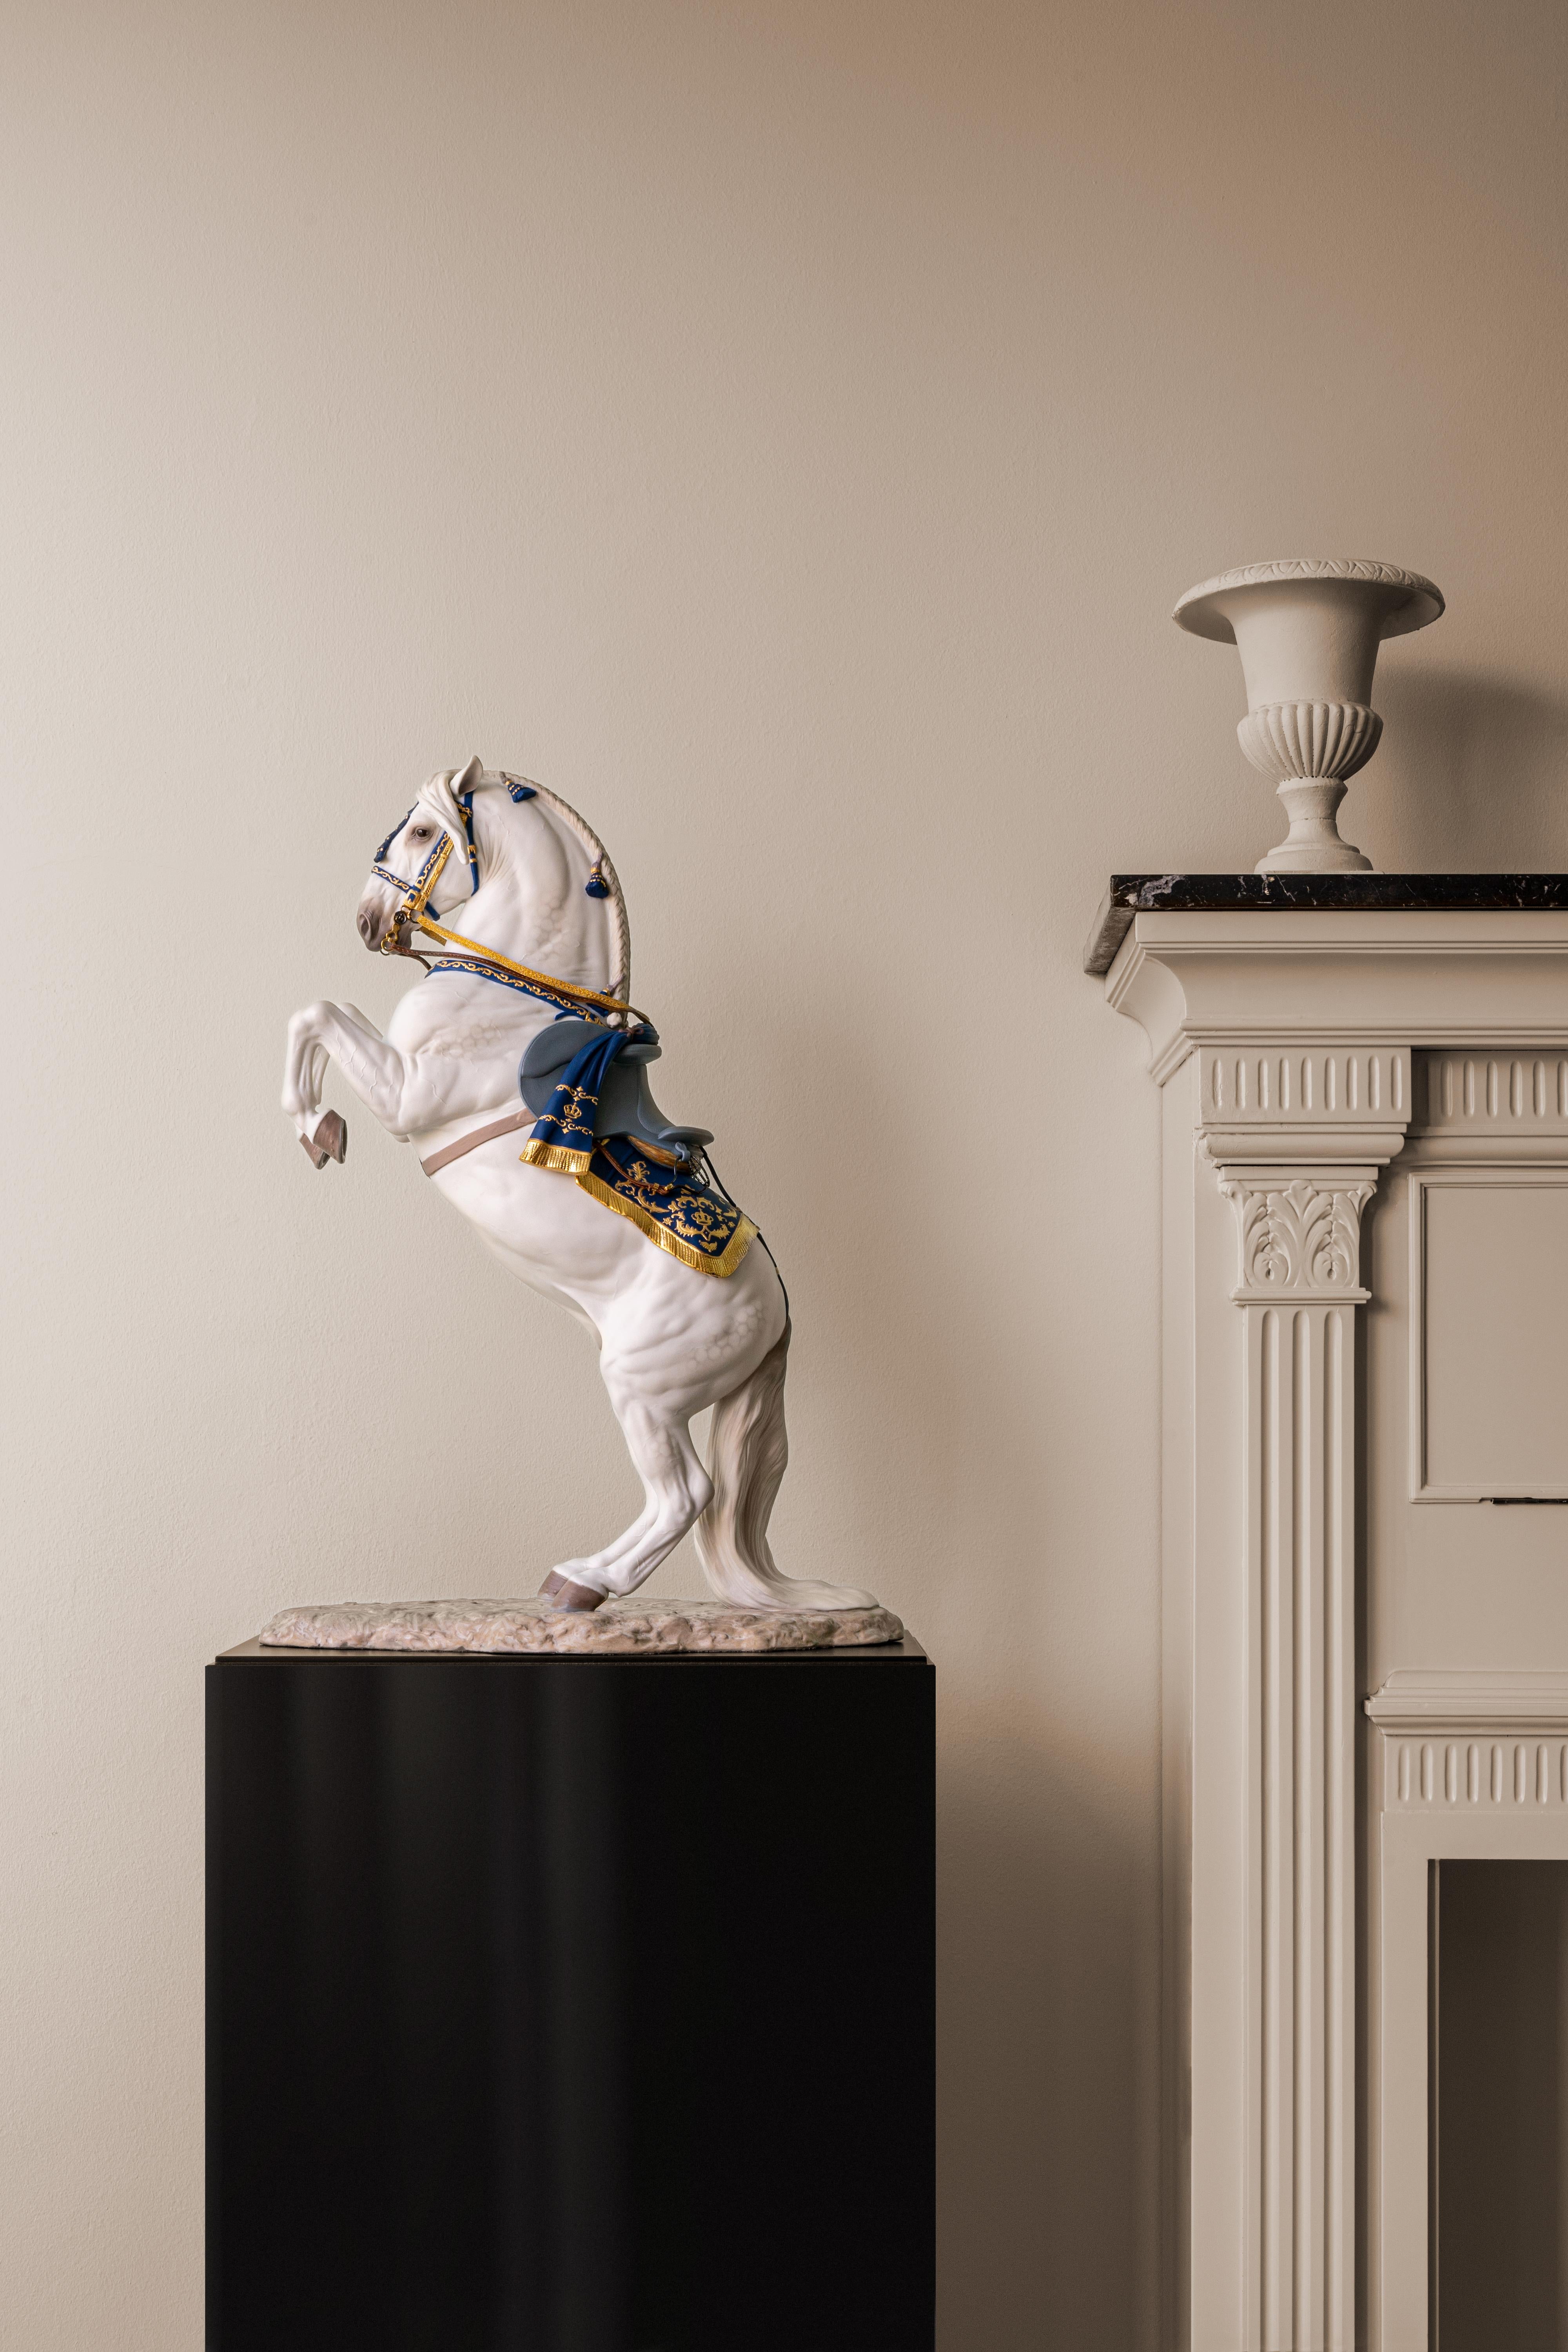 Limited edition High Porcelain sculpture of a Spanish pure breed horse carrying out a dressage exercise. Spanish Pure Breed - Haute École is a porcelain sculpture in a limited edition of 500 units which depicts one of the world’s most prestigious